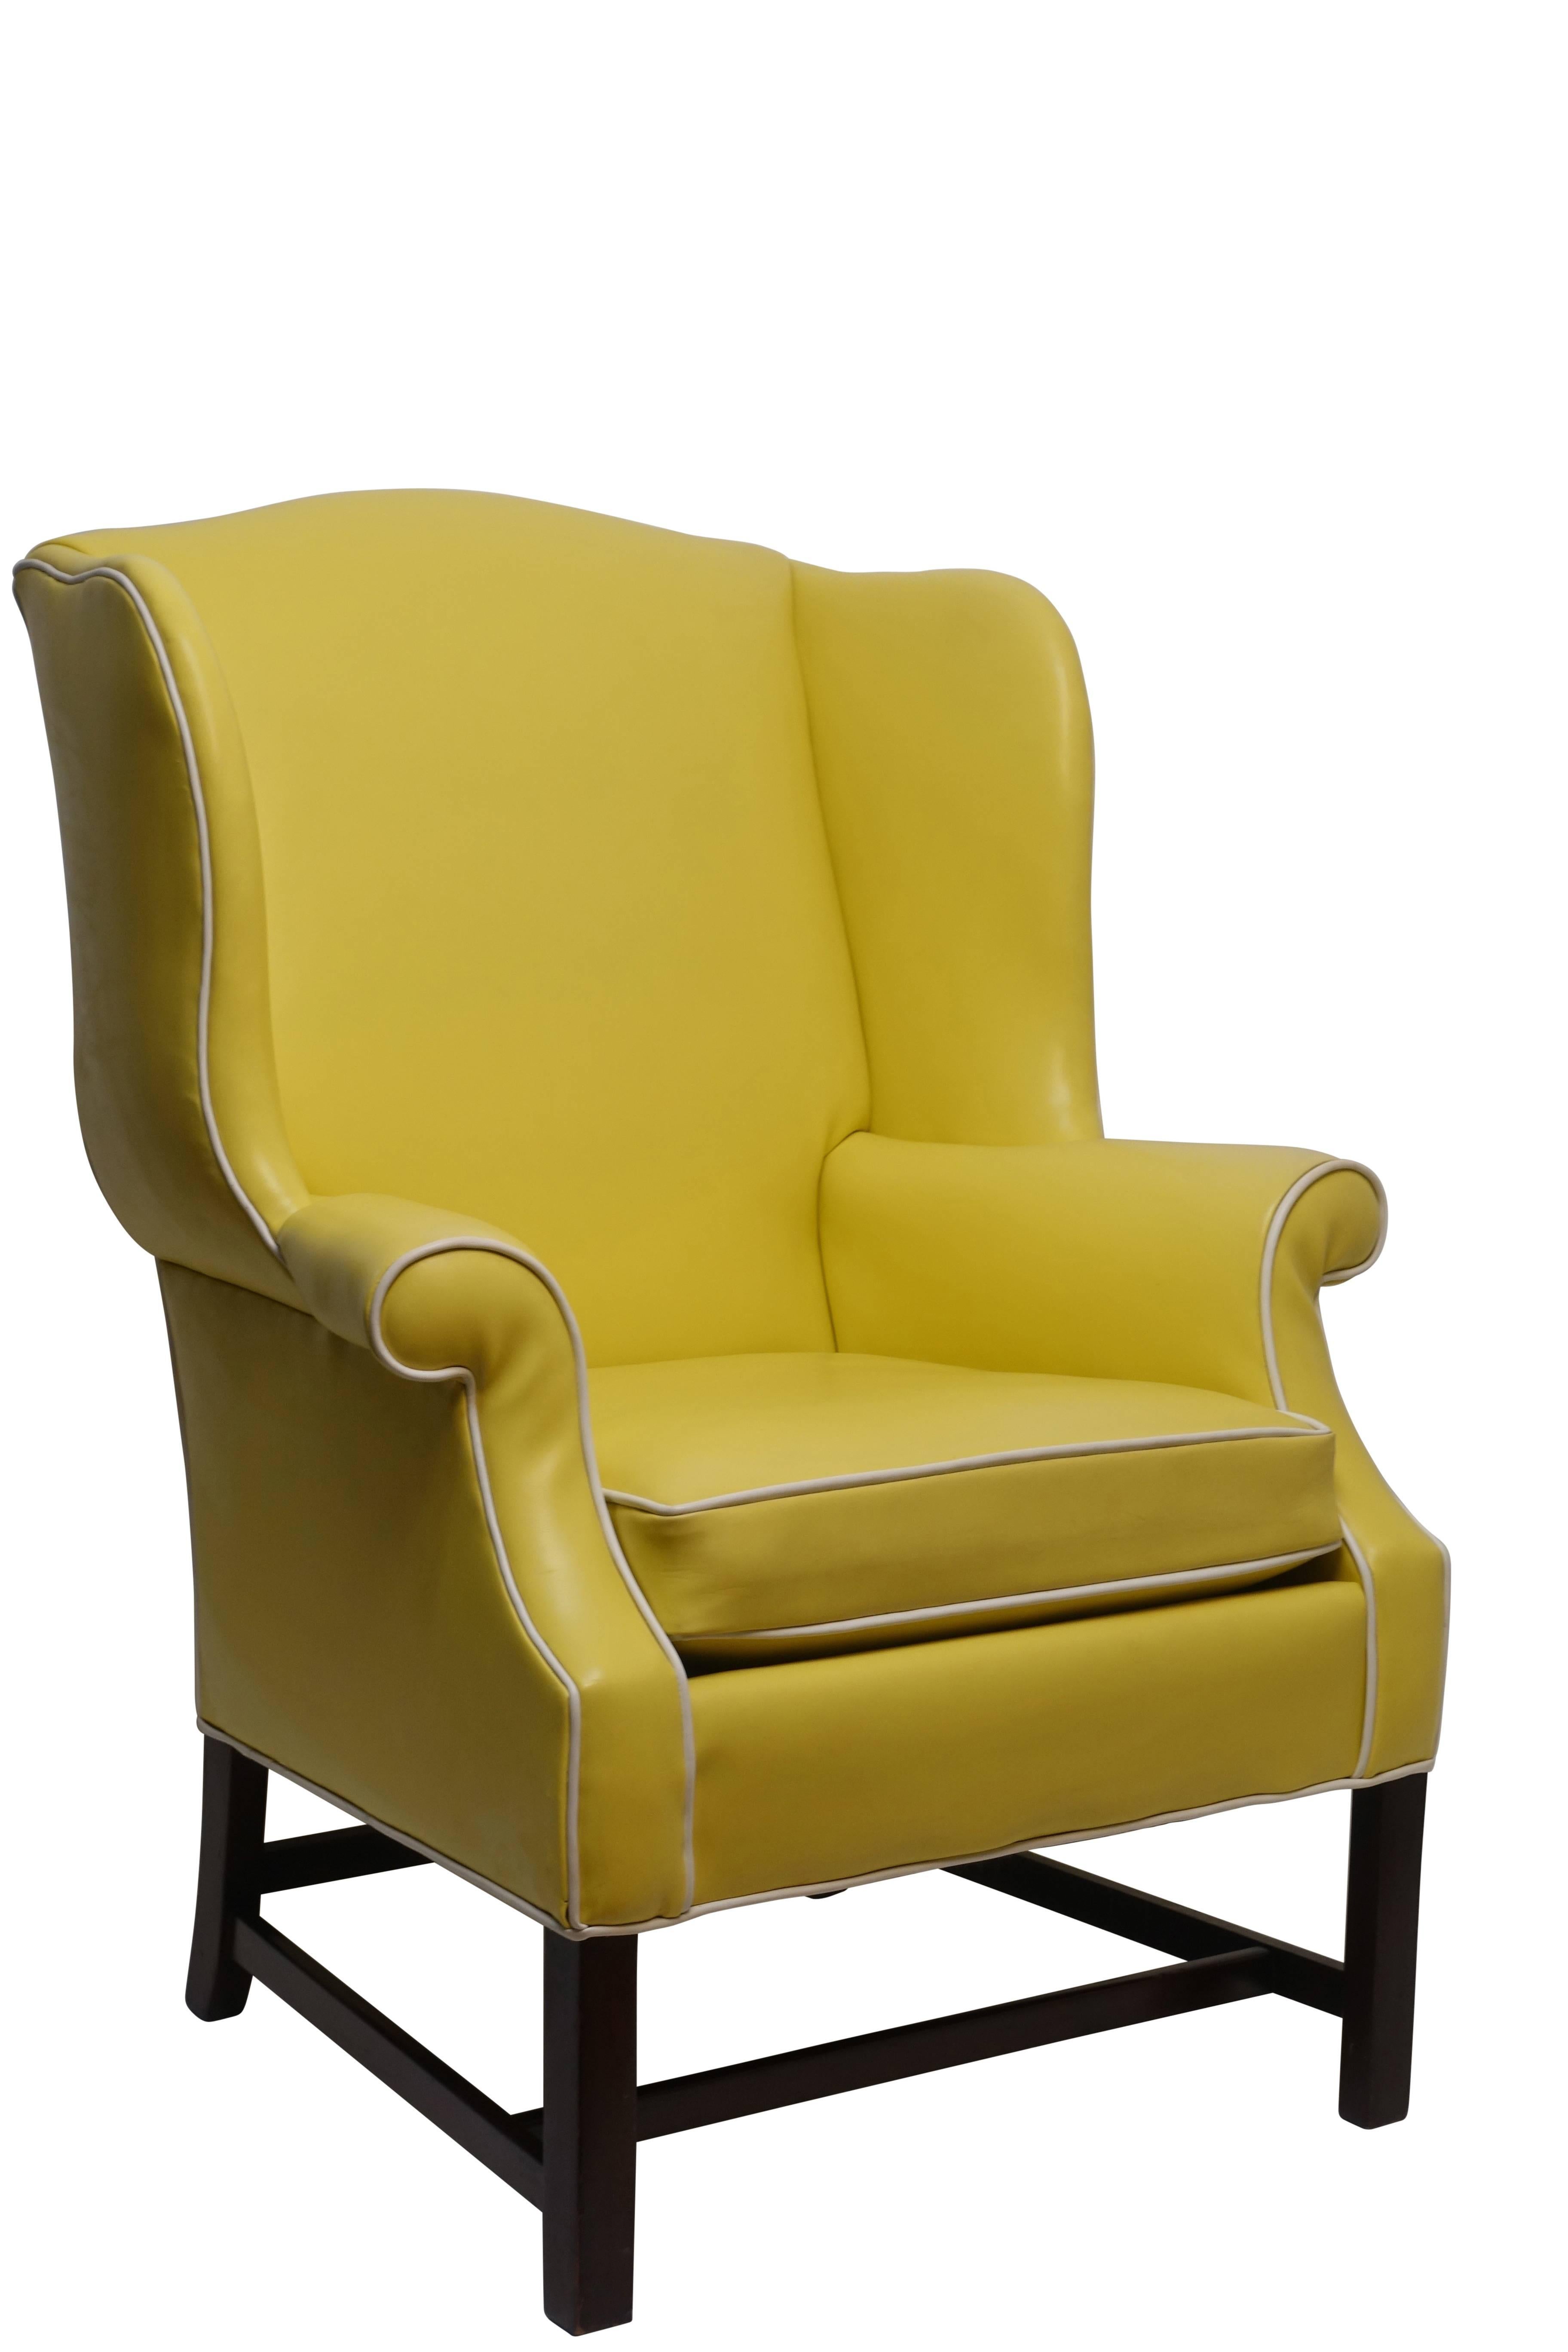 Pair of Georgian Style Yellow Vinyl Wingback Chairs with Piping Detail, 1960s 1